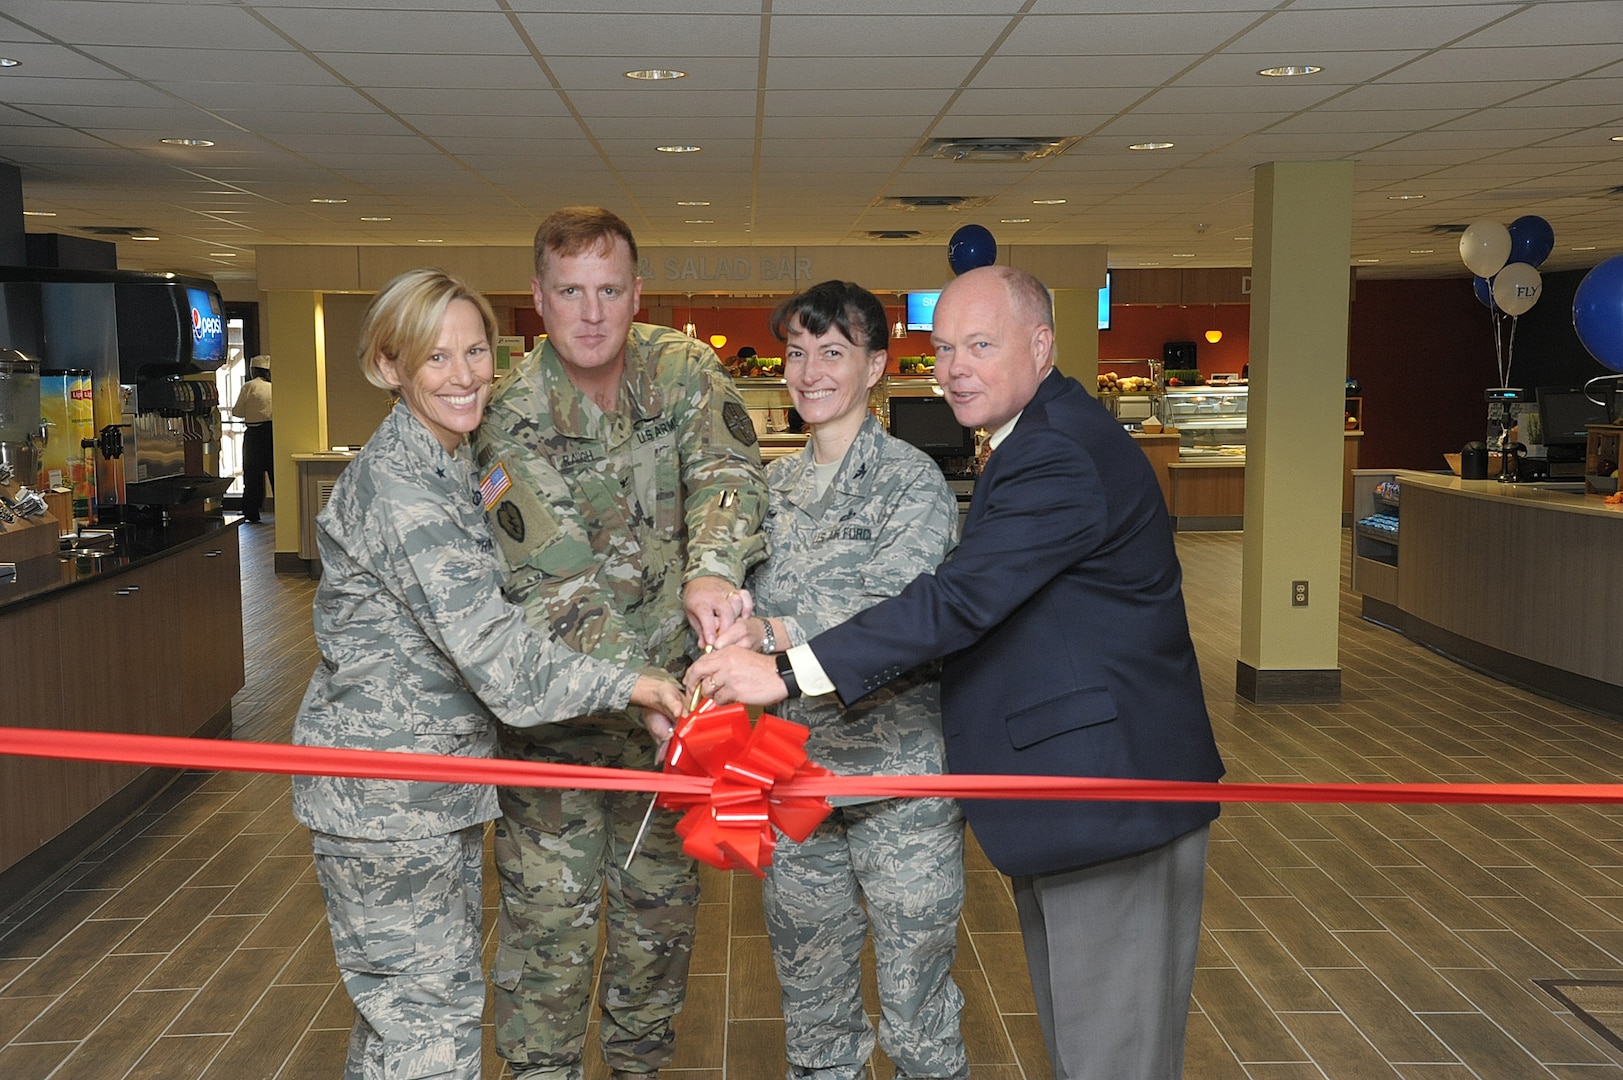 From left: Brig, Gen Heather Pringle, 502nd Air Base Wing and Joint Base San Antonio commander; Col. David Raugh, 502nd Force Support Group commander; Col. Donna Turner, Air Force Services Activity commander; and Brett Ladd, Sodexo vice president of operations, cut the ribbon to the Wingman Café Dining Facility Oct. 11 during the grand-opening ceremony at JBSA-Randolph. Joint Base San Antonio-Randolph’s dining facility, or DFAC, which had been closed for renovation since June 2015, reopened last week with a new name, a new look, more food choices and an expanded customer base.